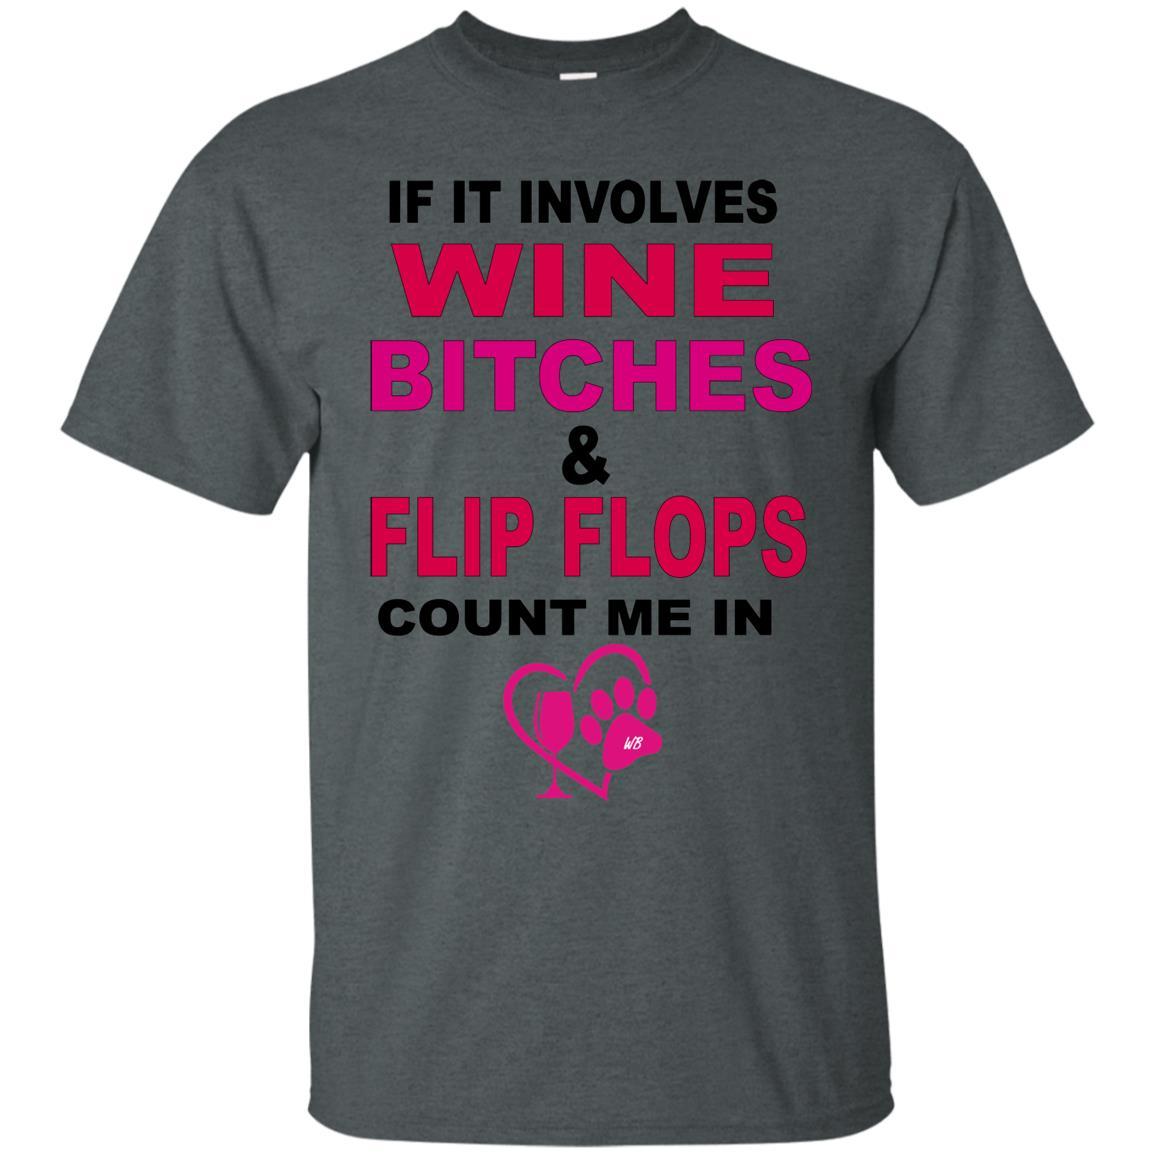 T-Shirts Dark Heather / S WineyBitches.co " If It Involves Wine Bitches & Flip Flops I'm In" Ultra Cotton Unisex T-Shirt WineyBitches.co Hilariously Funny T-Shirt for Wine & Dog Lovers   WineyBitchesCo